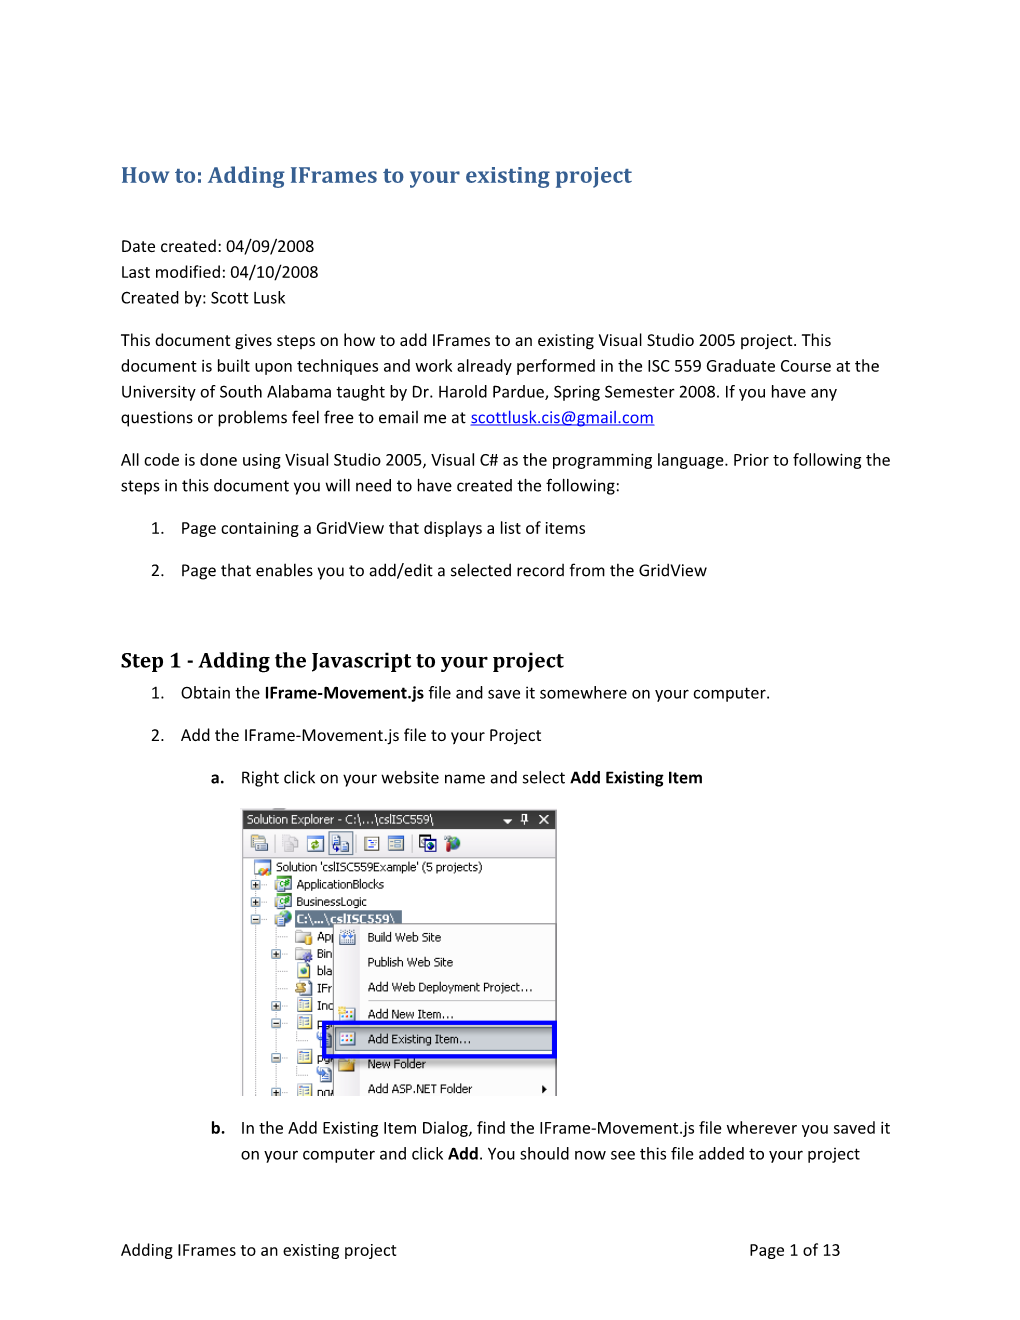 How To: Adding Iframes to Your Existing Project